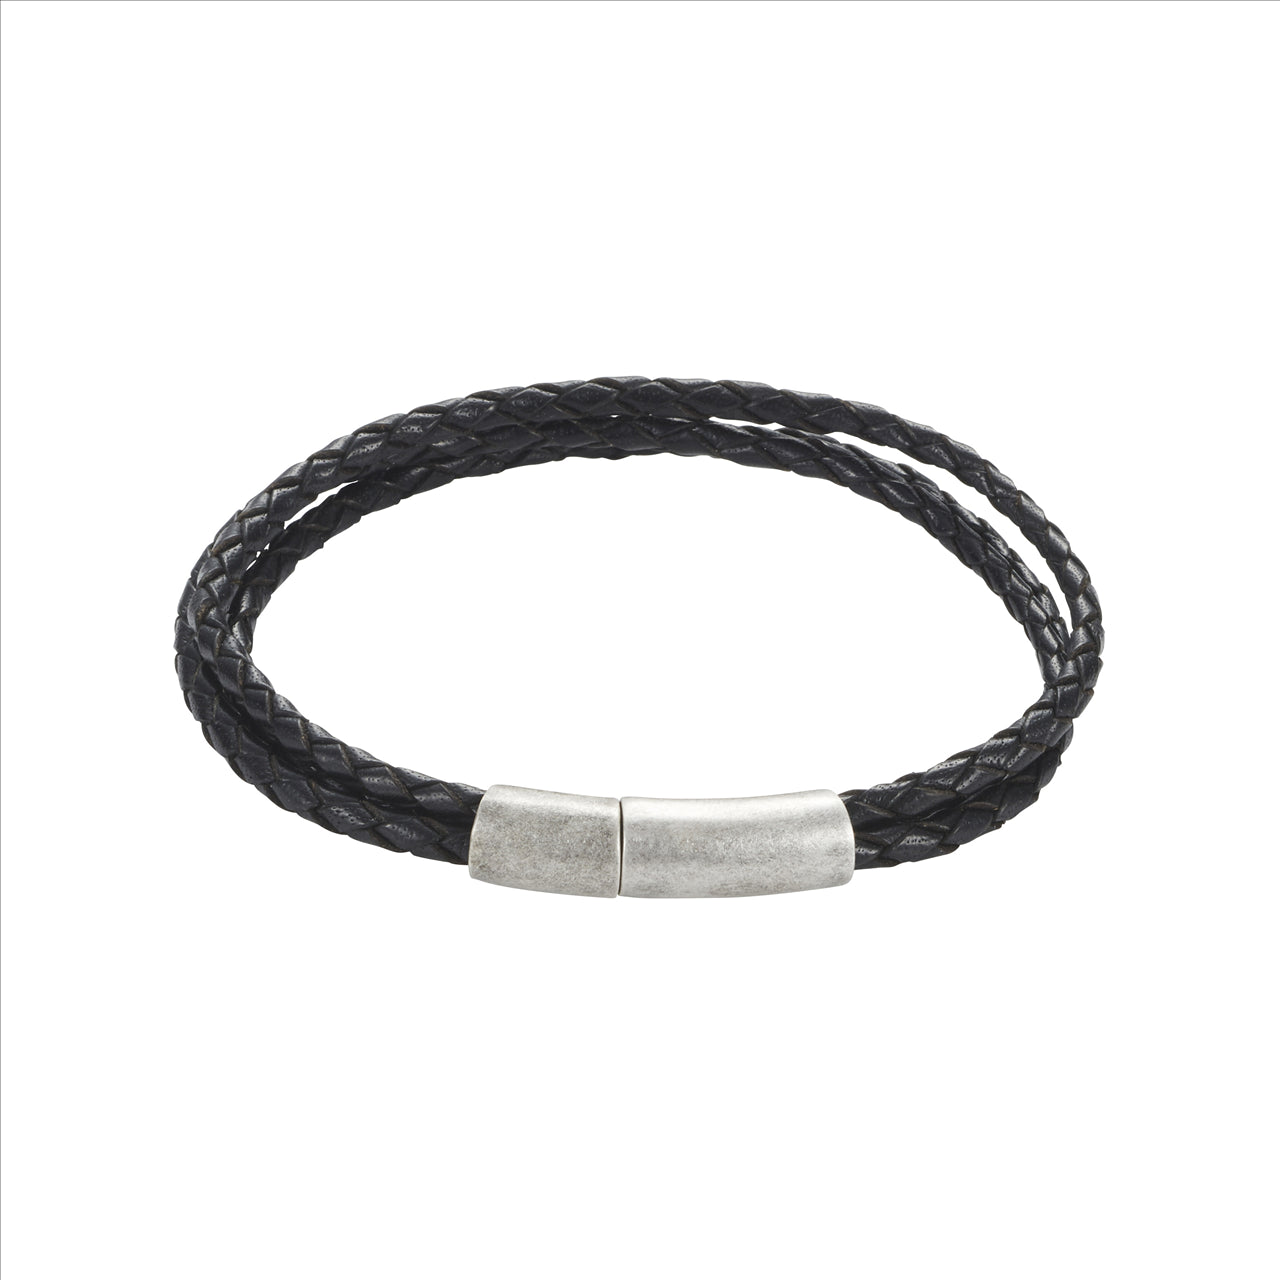 Black Leather Triple Strand Bracelet with Antique Plated Stainless Steel Clasp